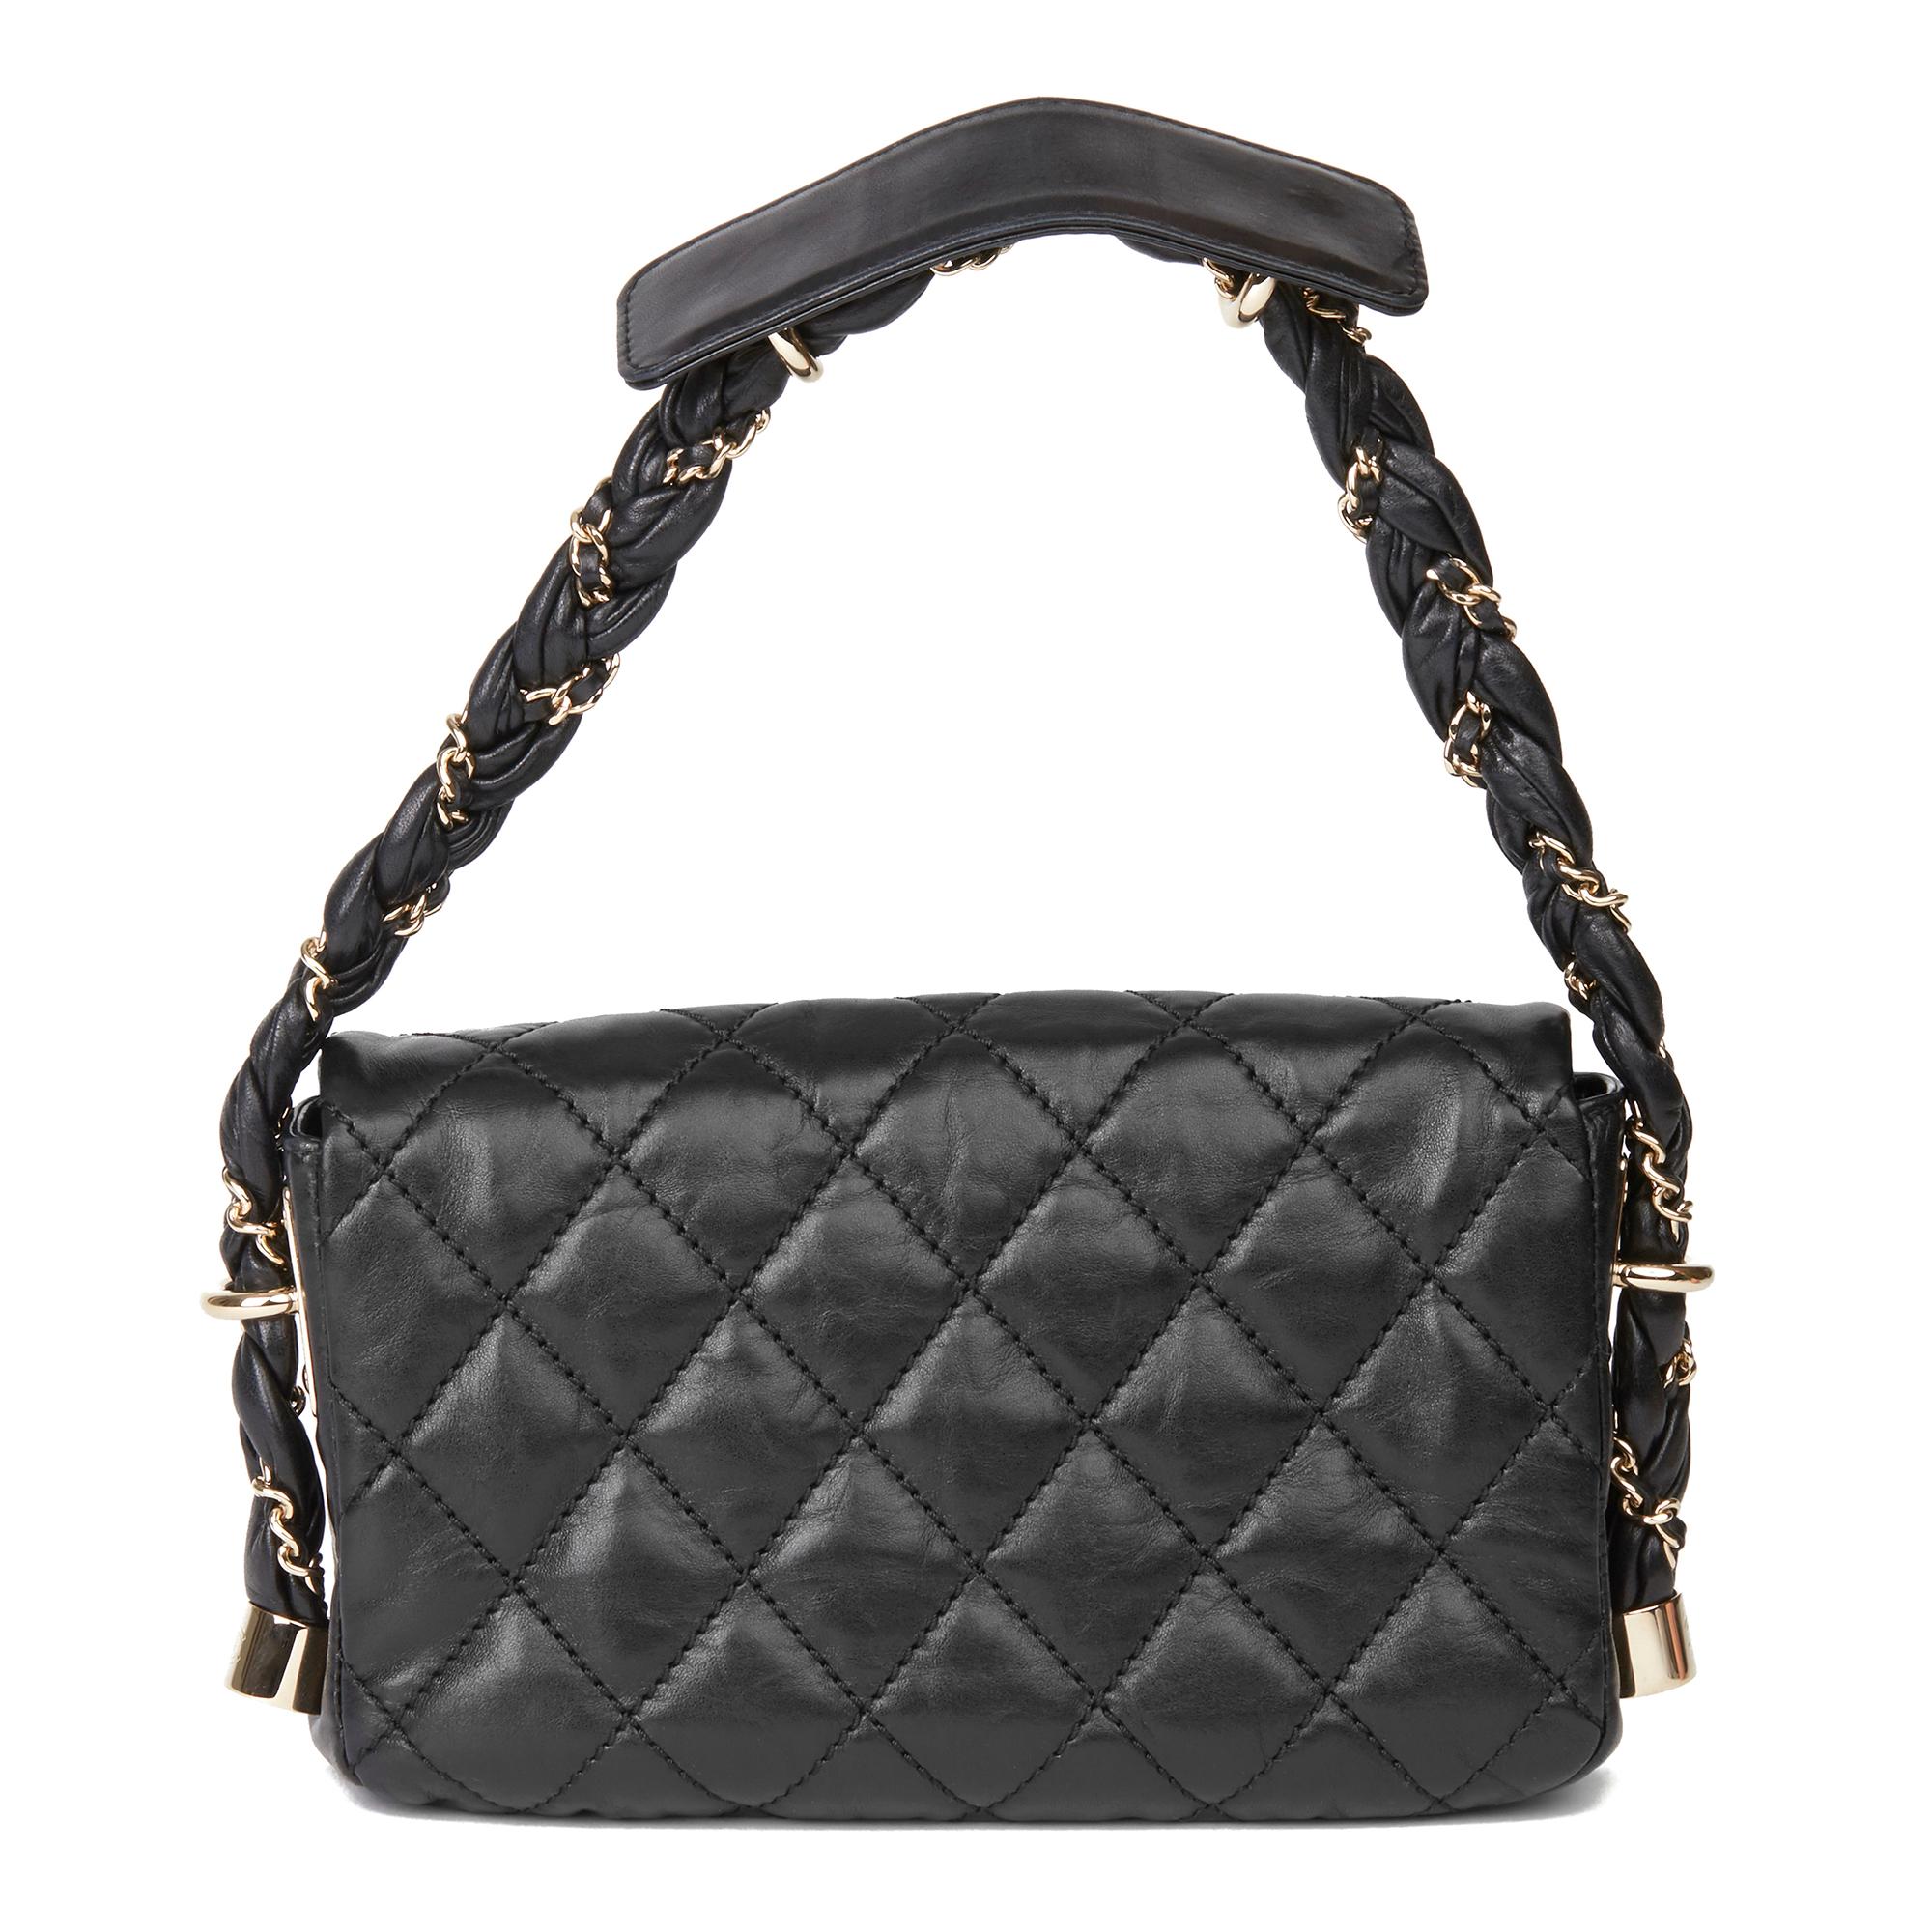 Women's or Men's 2006 Chanel Black Quilted Aged Calfskin Leather Classic Single Flap Bag